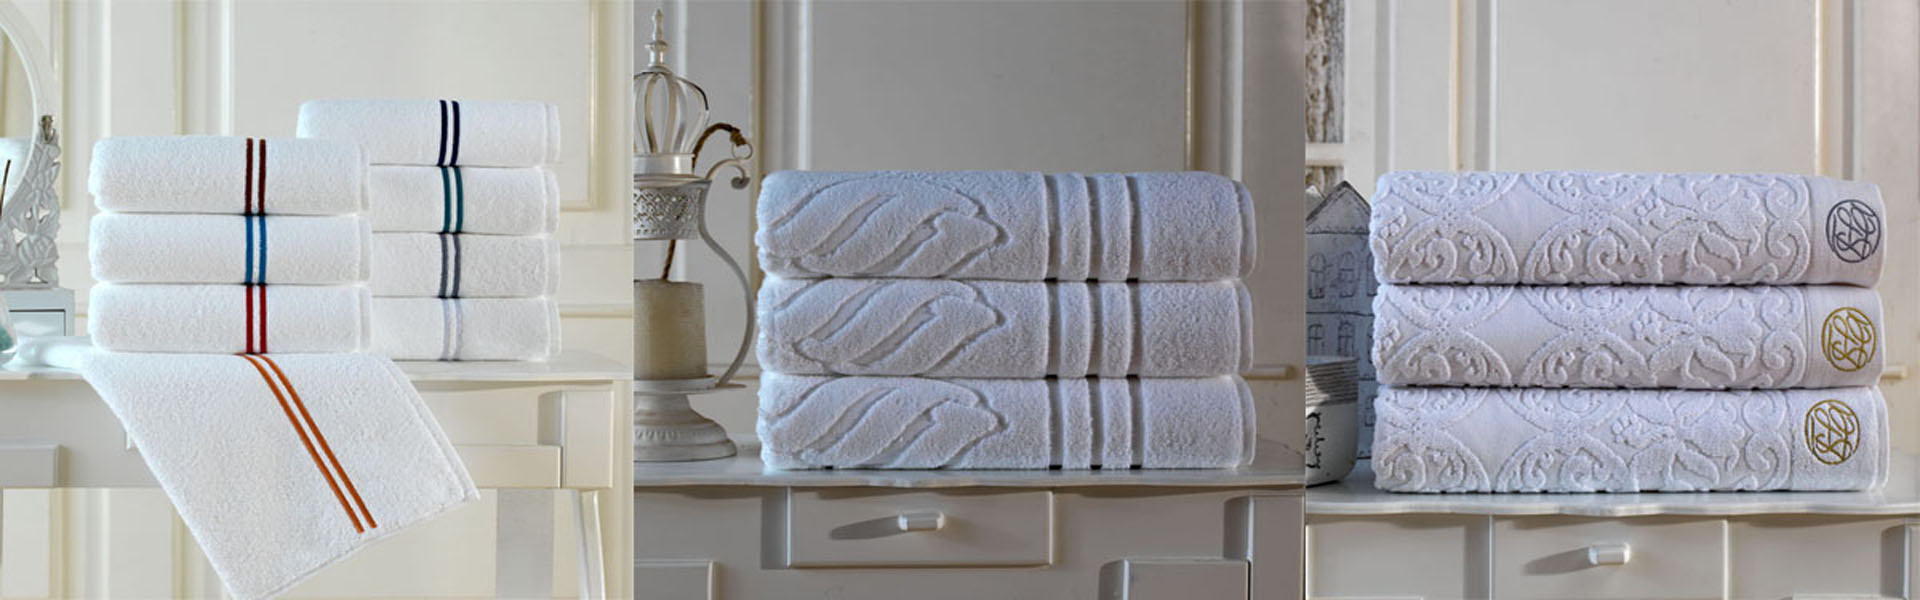 JAQUARD AND <br>SPORT TOWELS